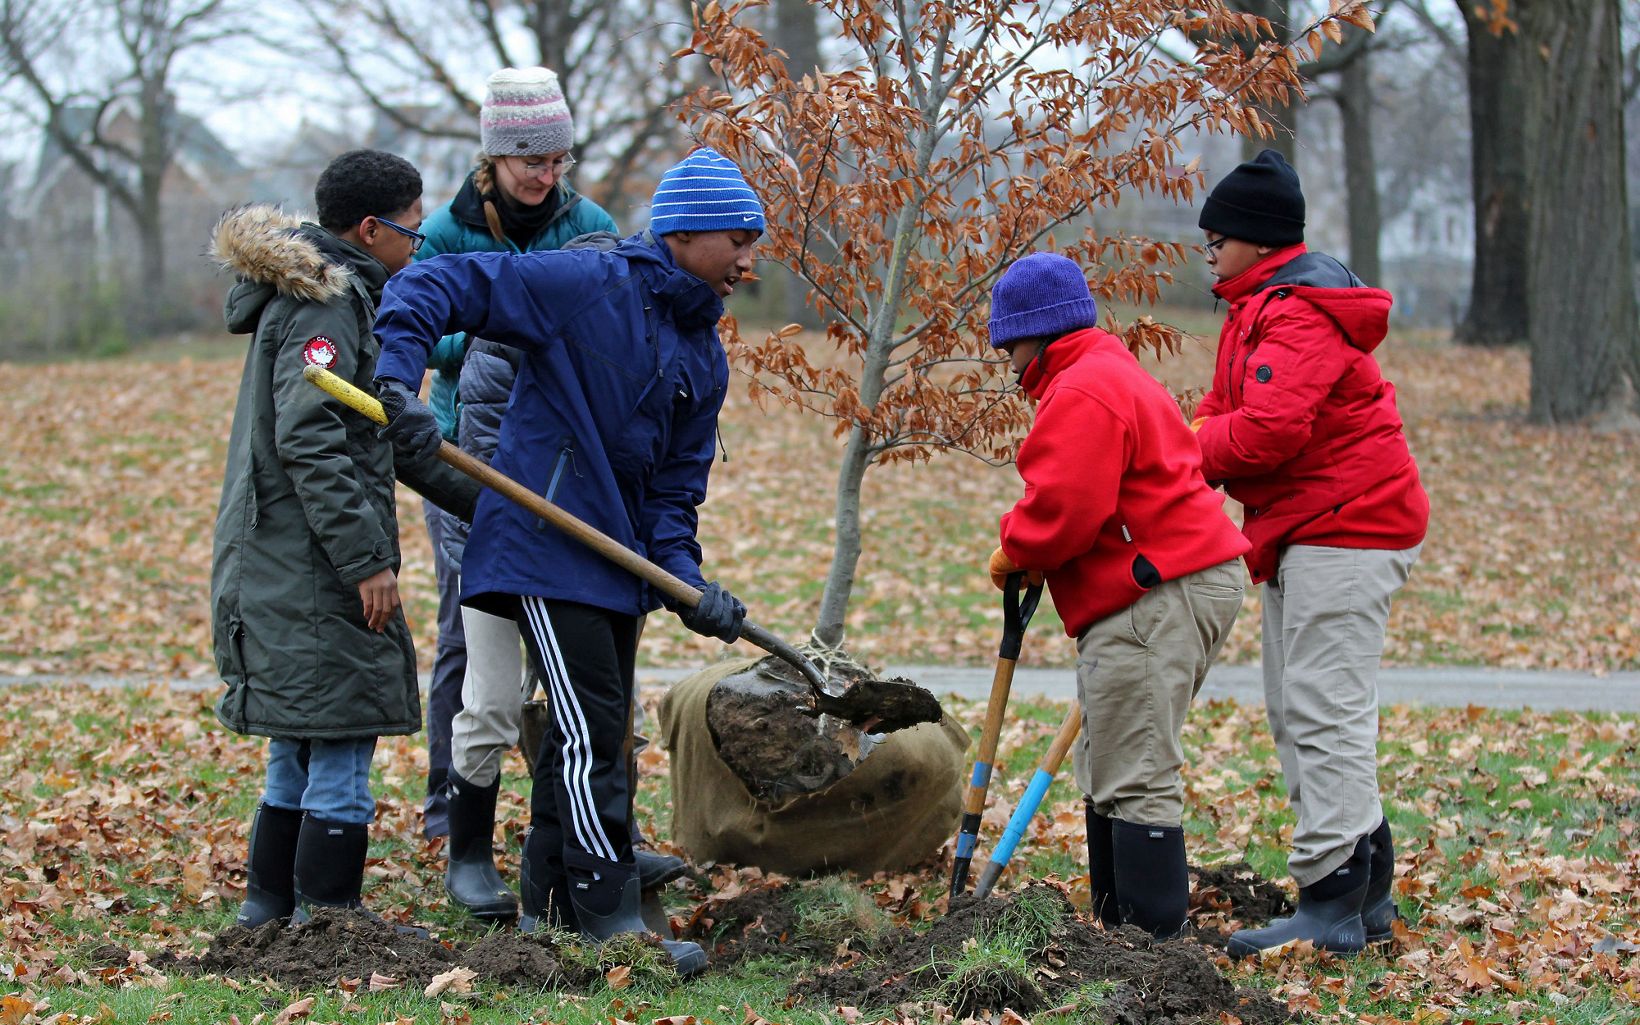  Students plant trees with the Urban Ecology Center in Washington Park.